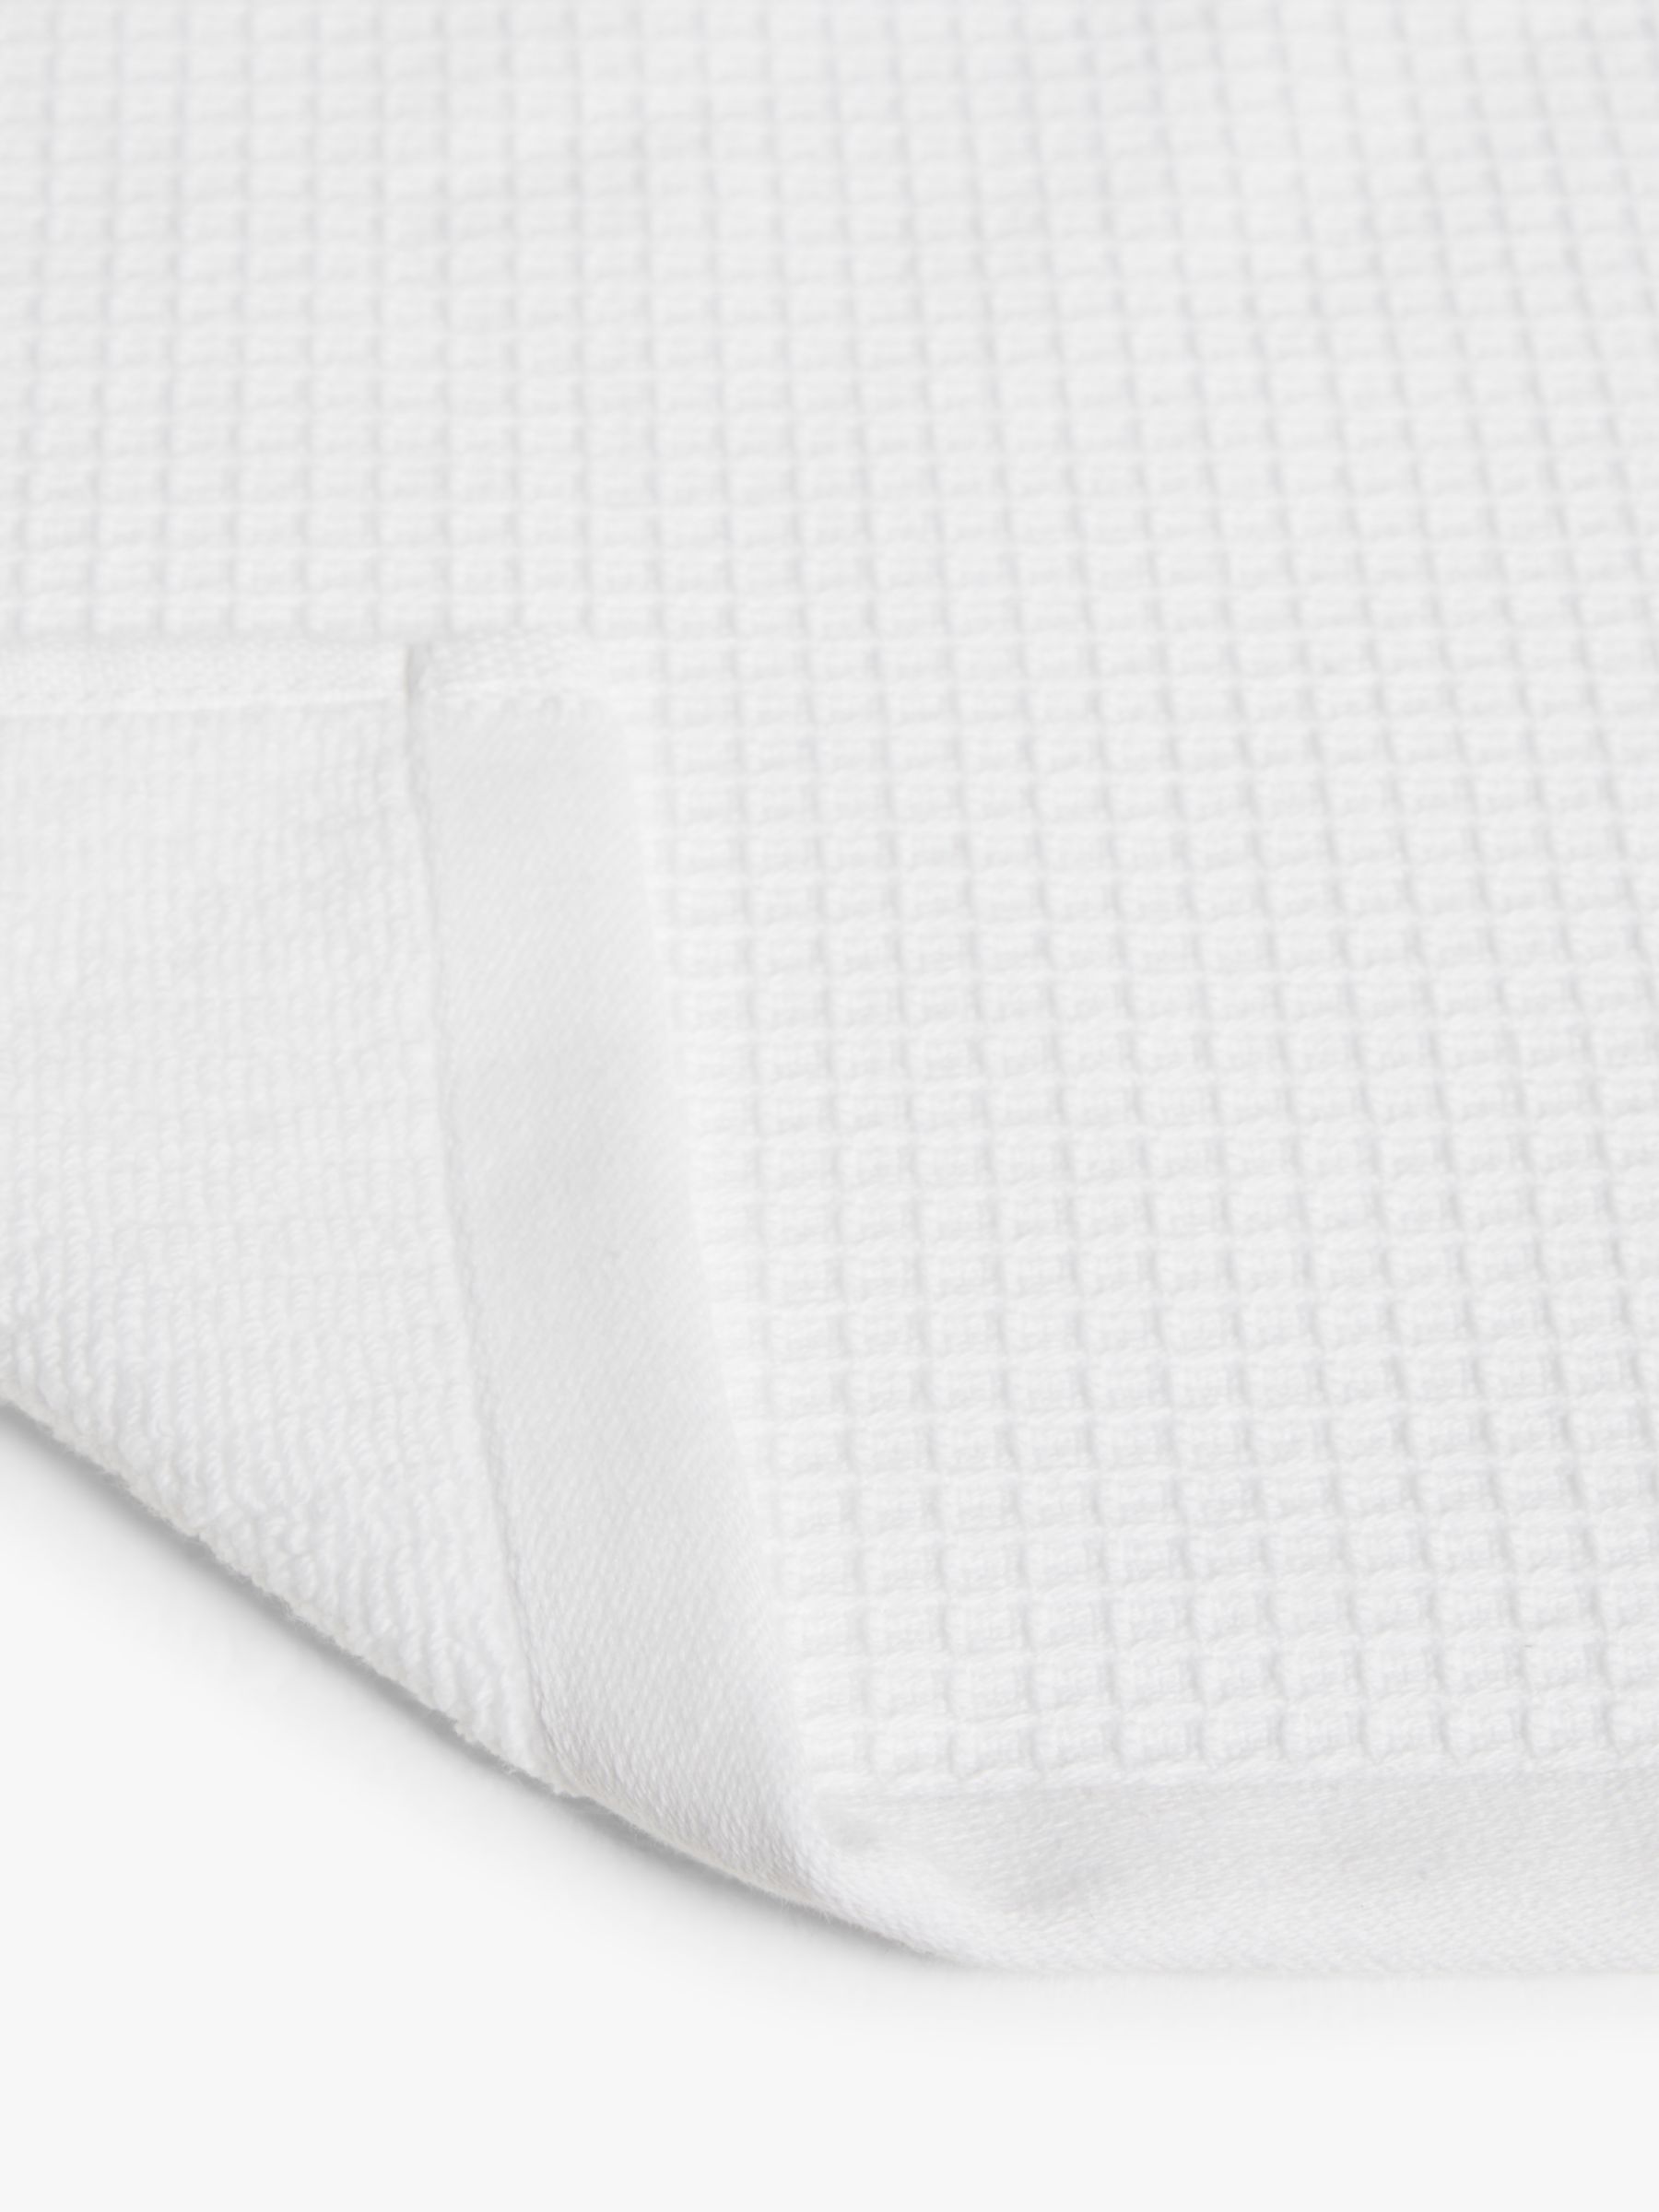 John Lewis Spa Waffle Face Cloths, Pack of 3, White